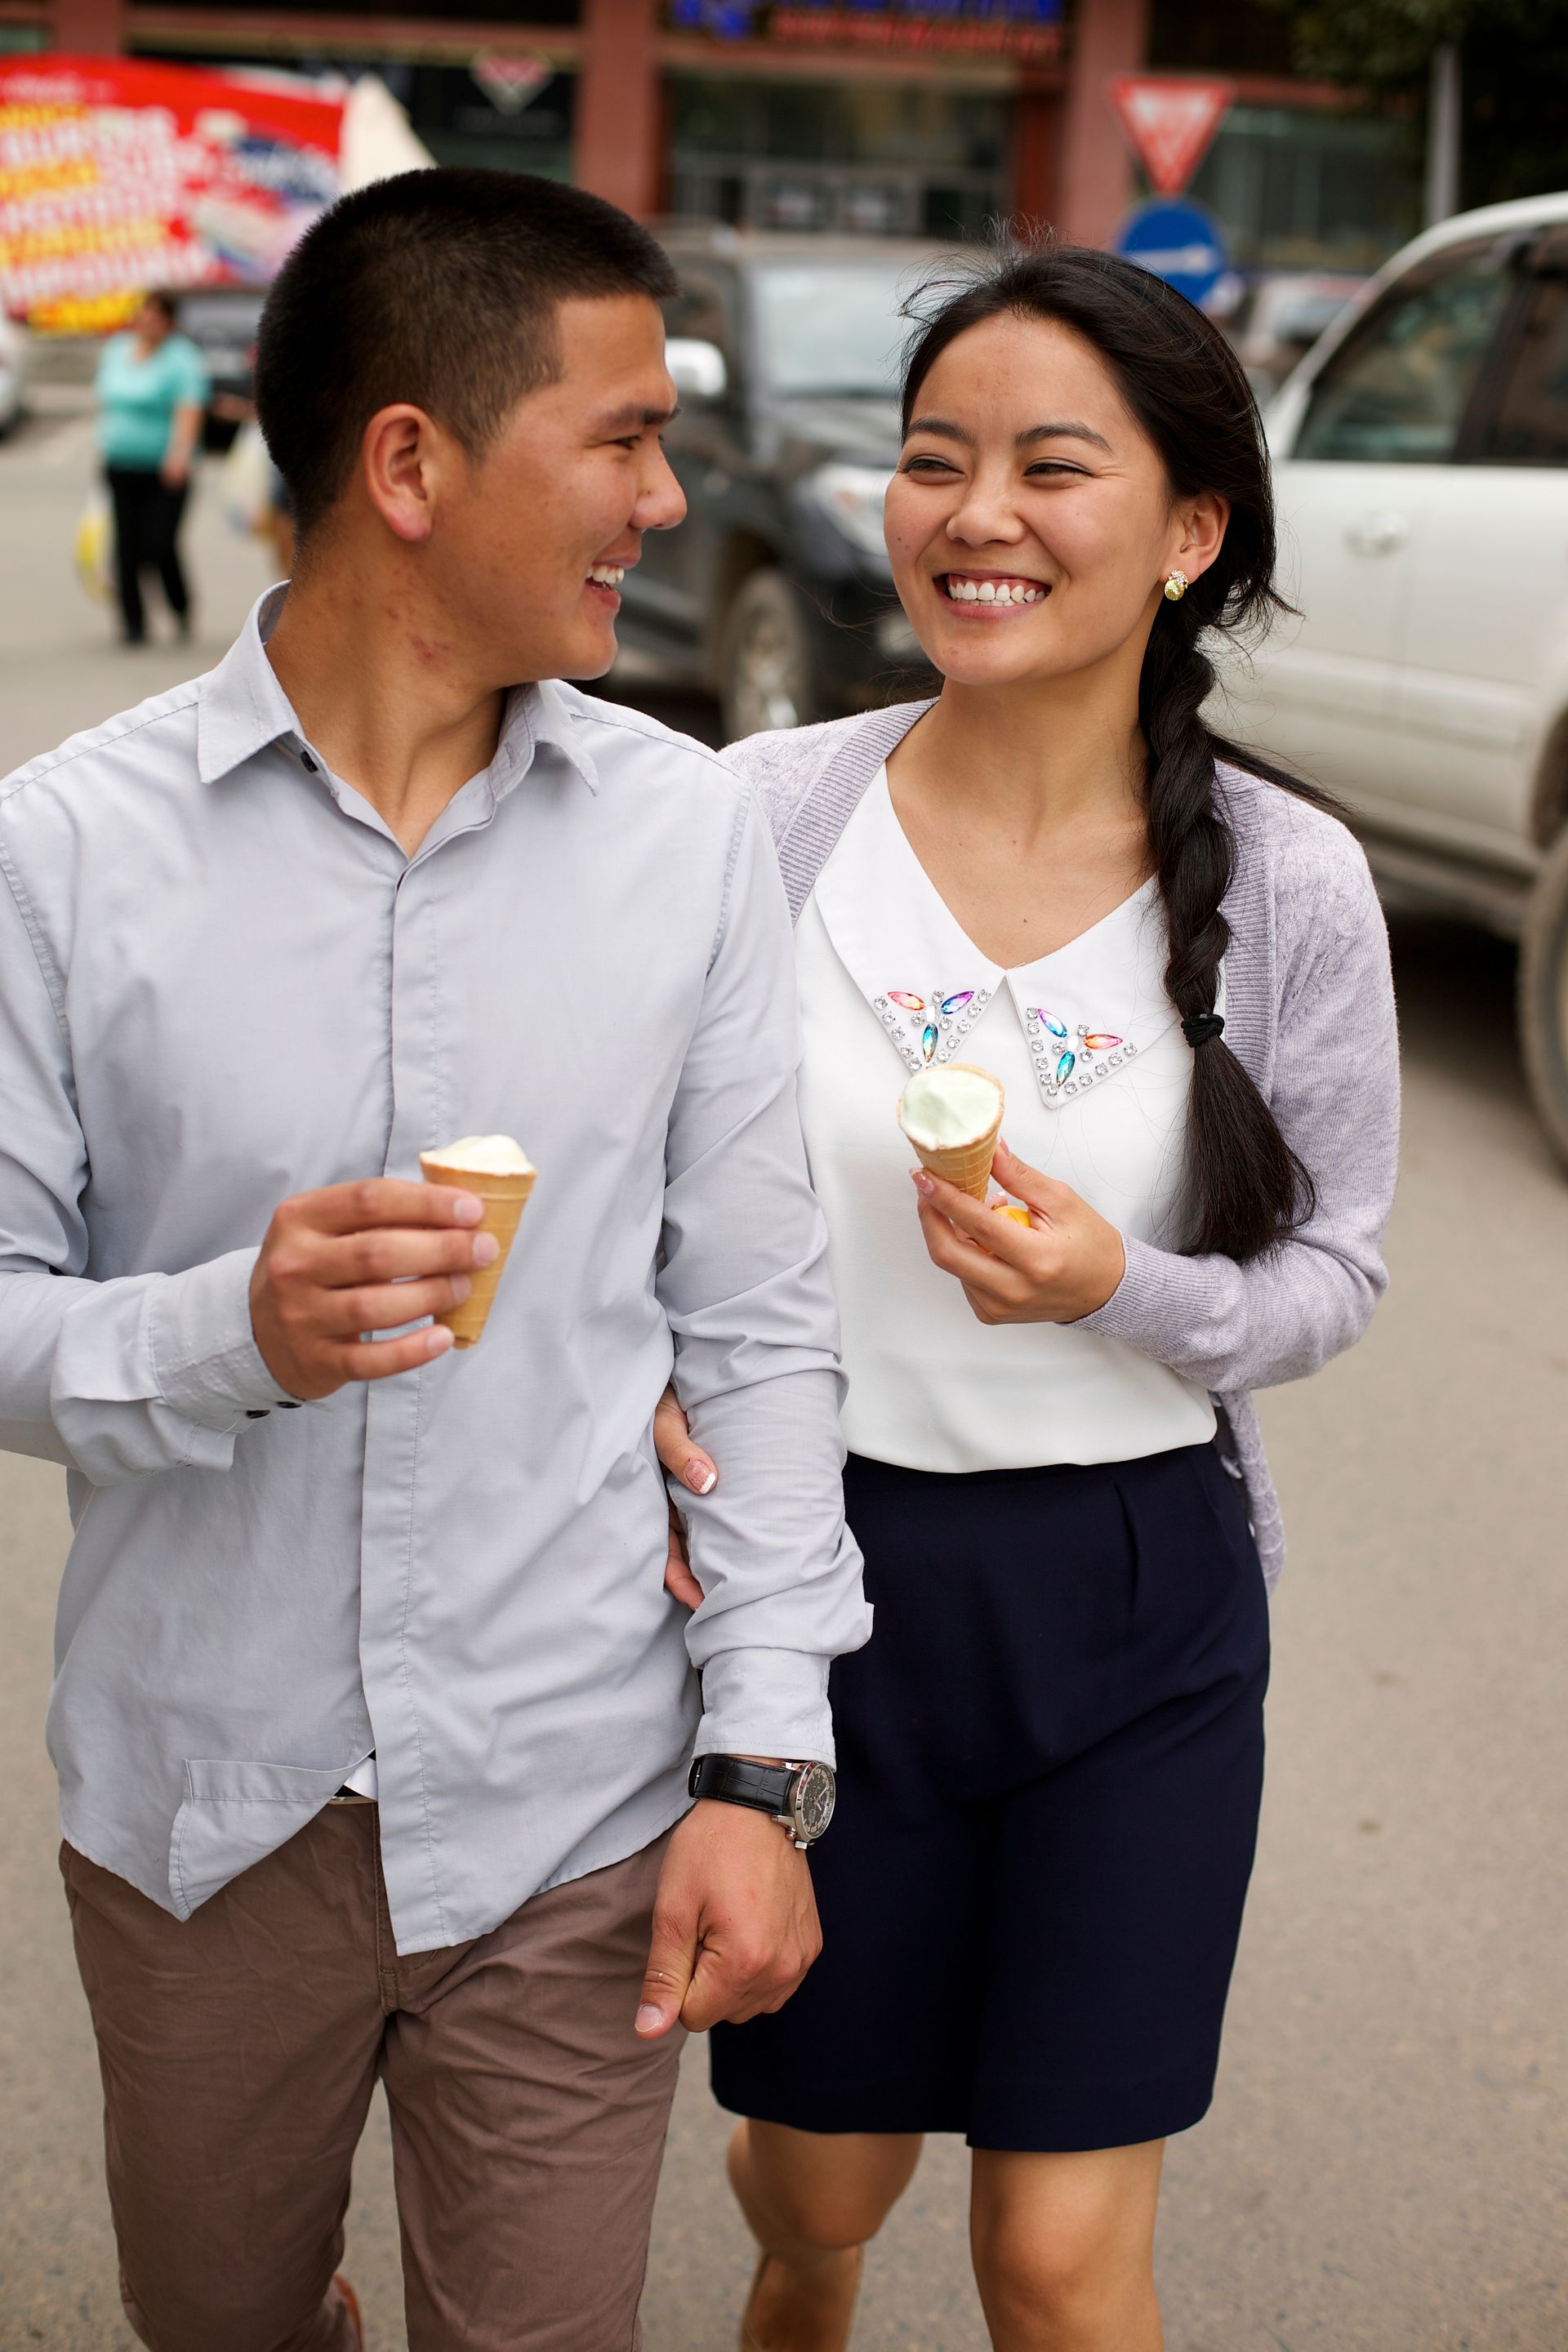 A young man and a young woman eat ice cream while walking down a street together.